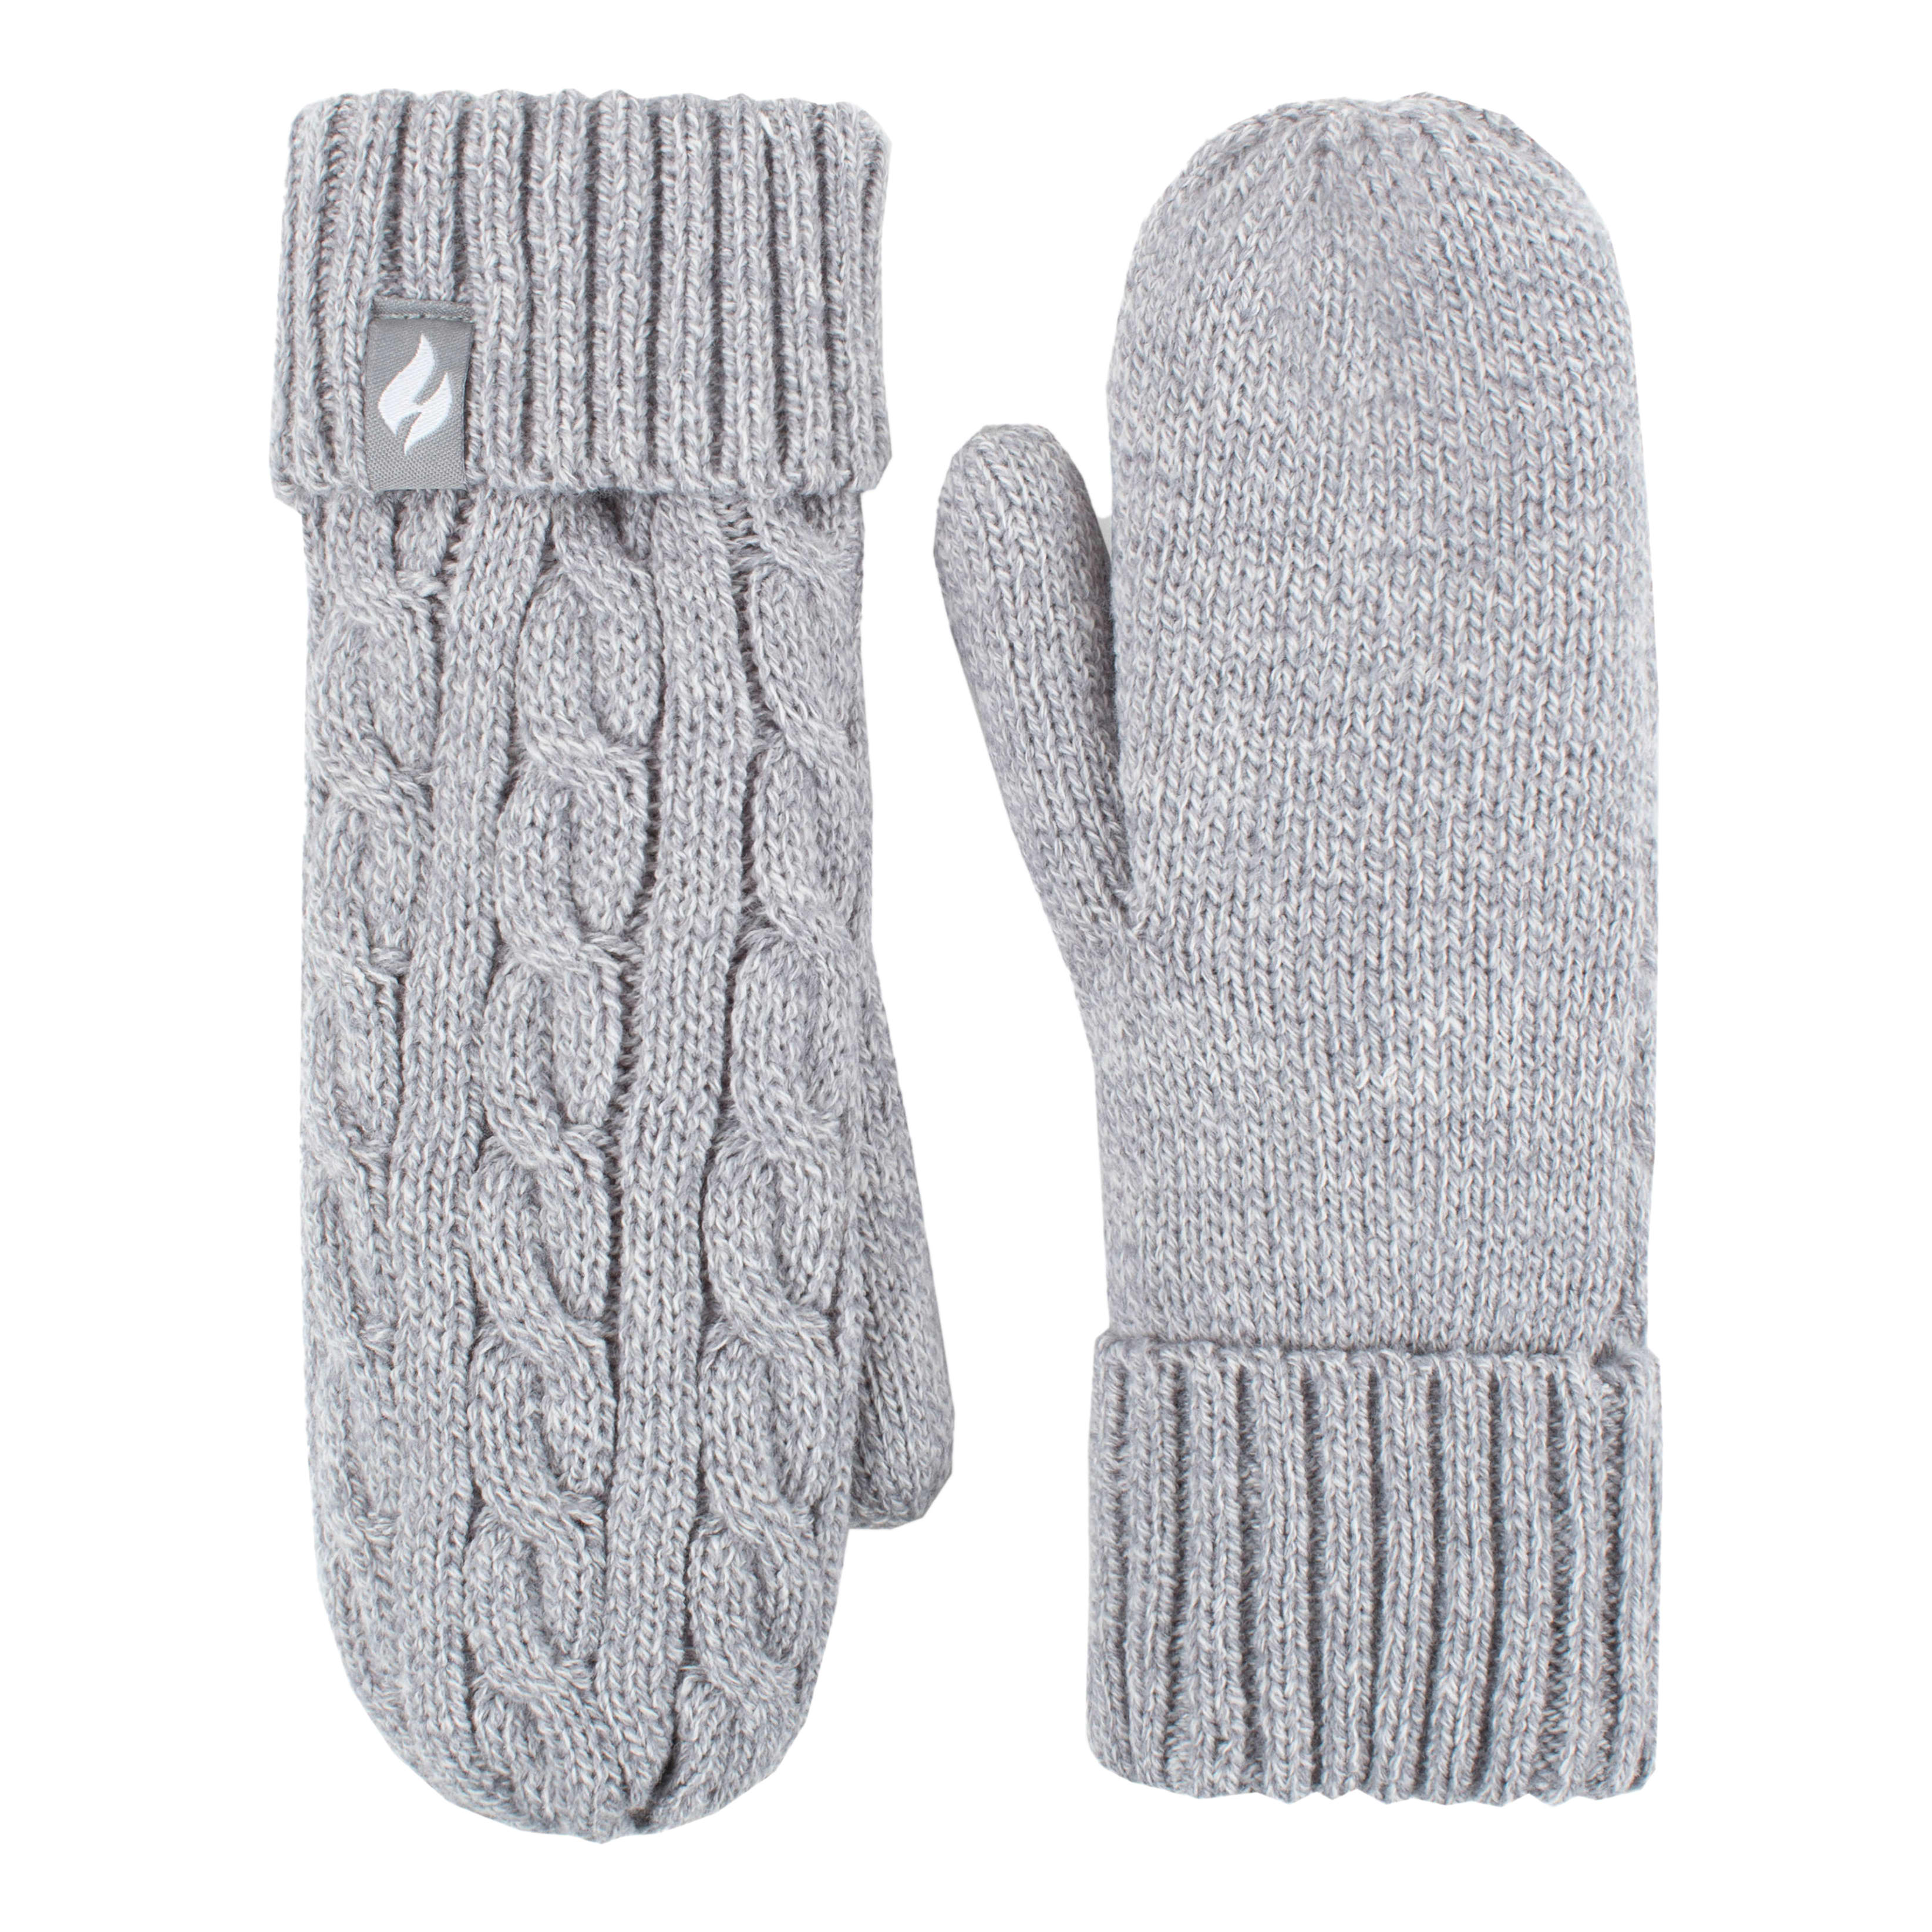 Heat Holders® Women’s Cable Knit Mittens